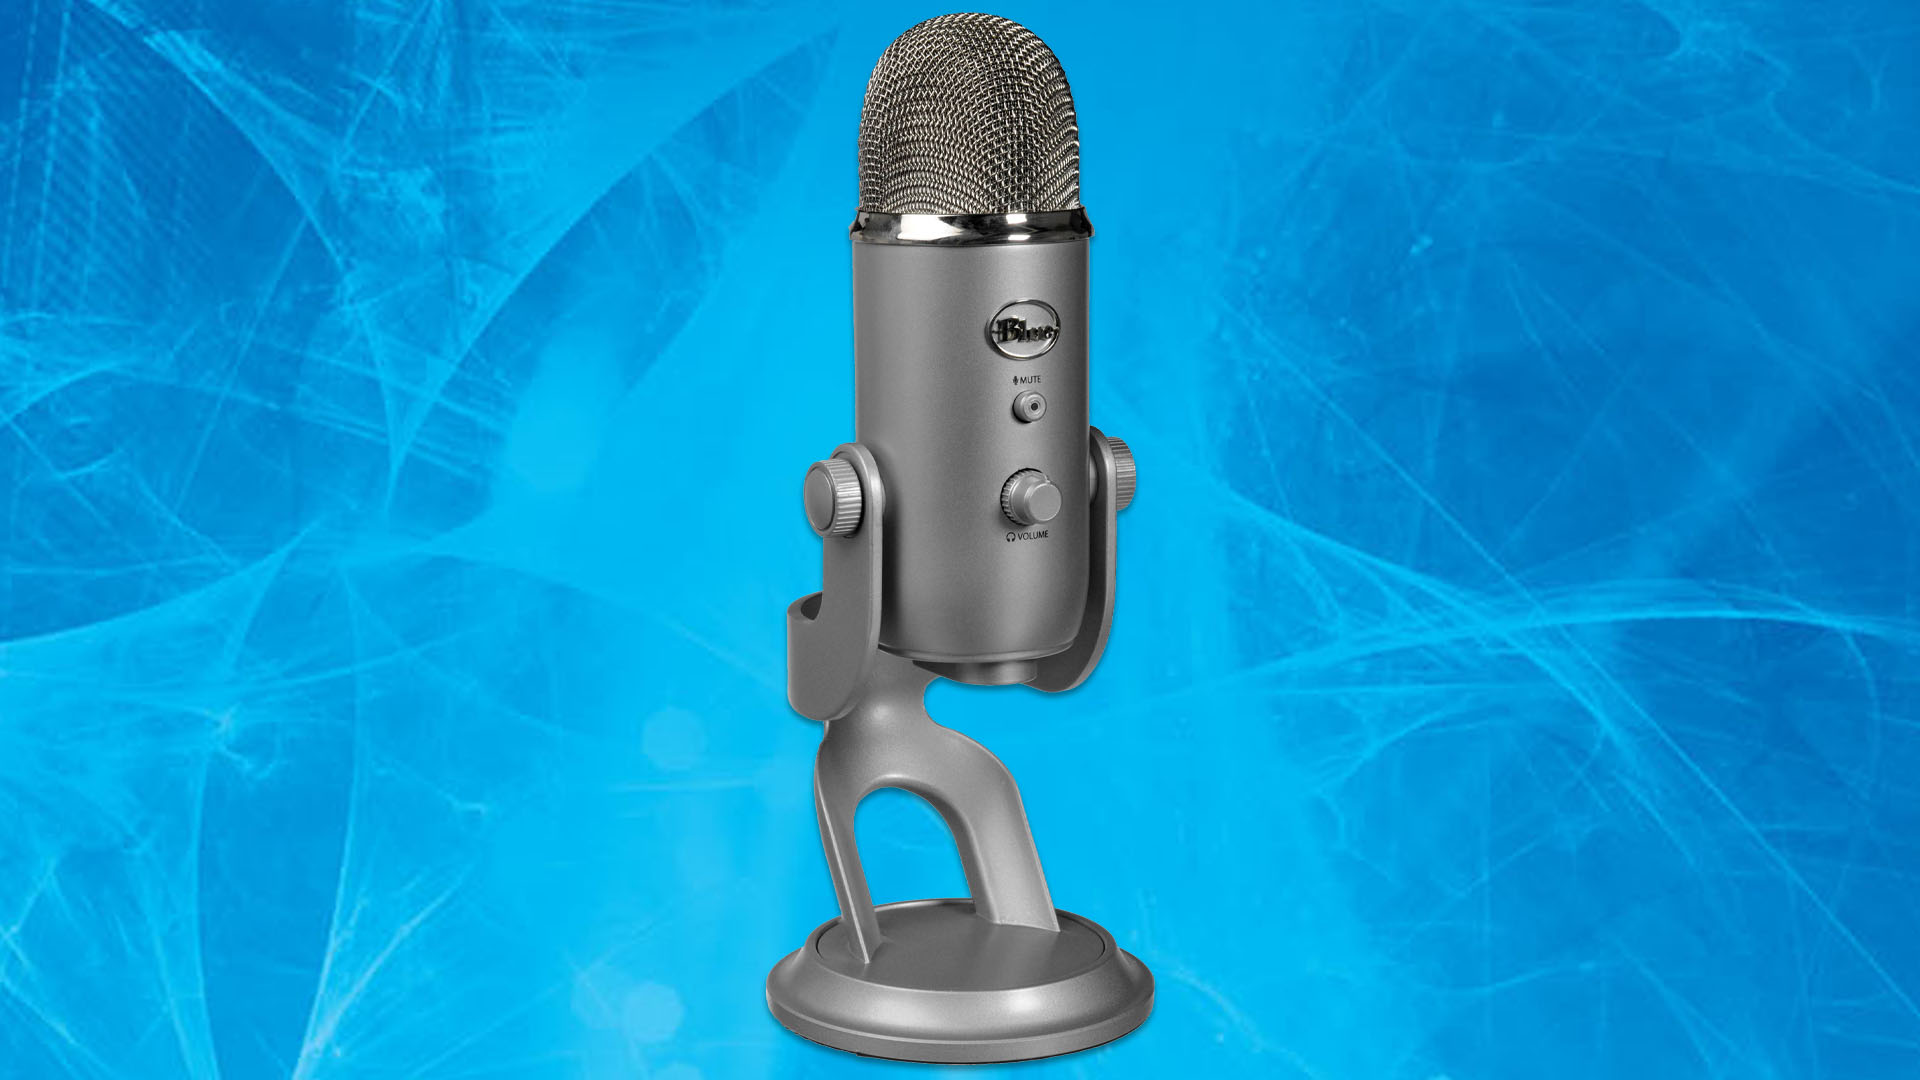 Blue Yeti USB Microphone Review - Is It Worth The Price?